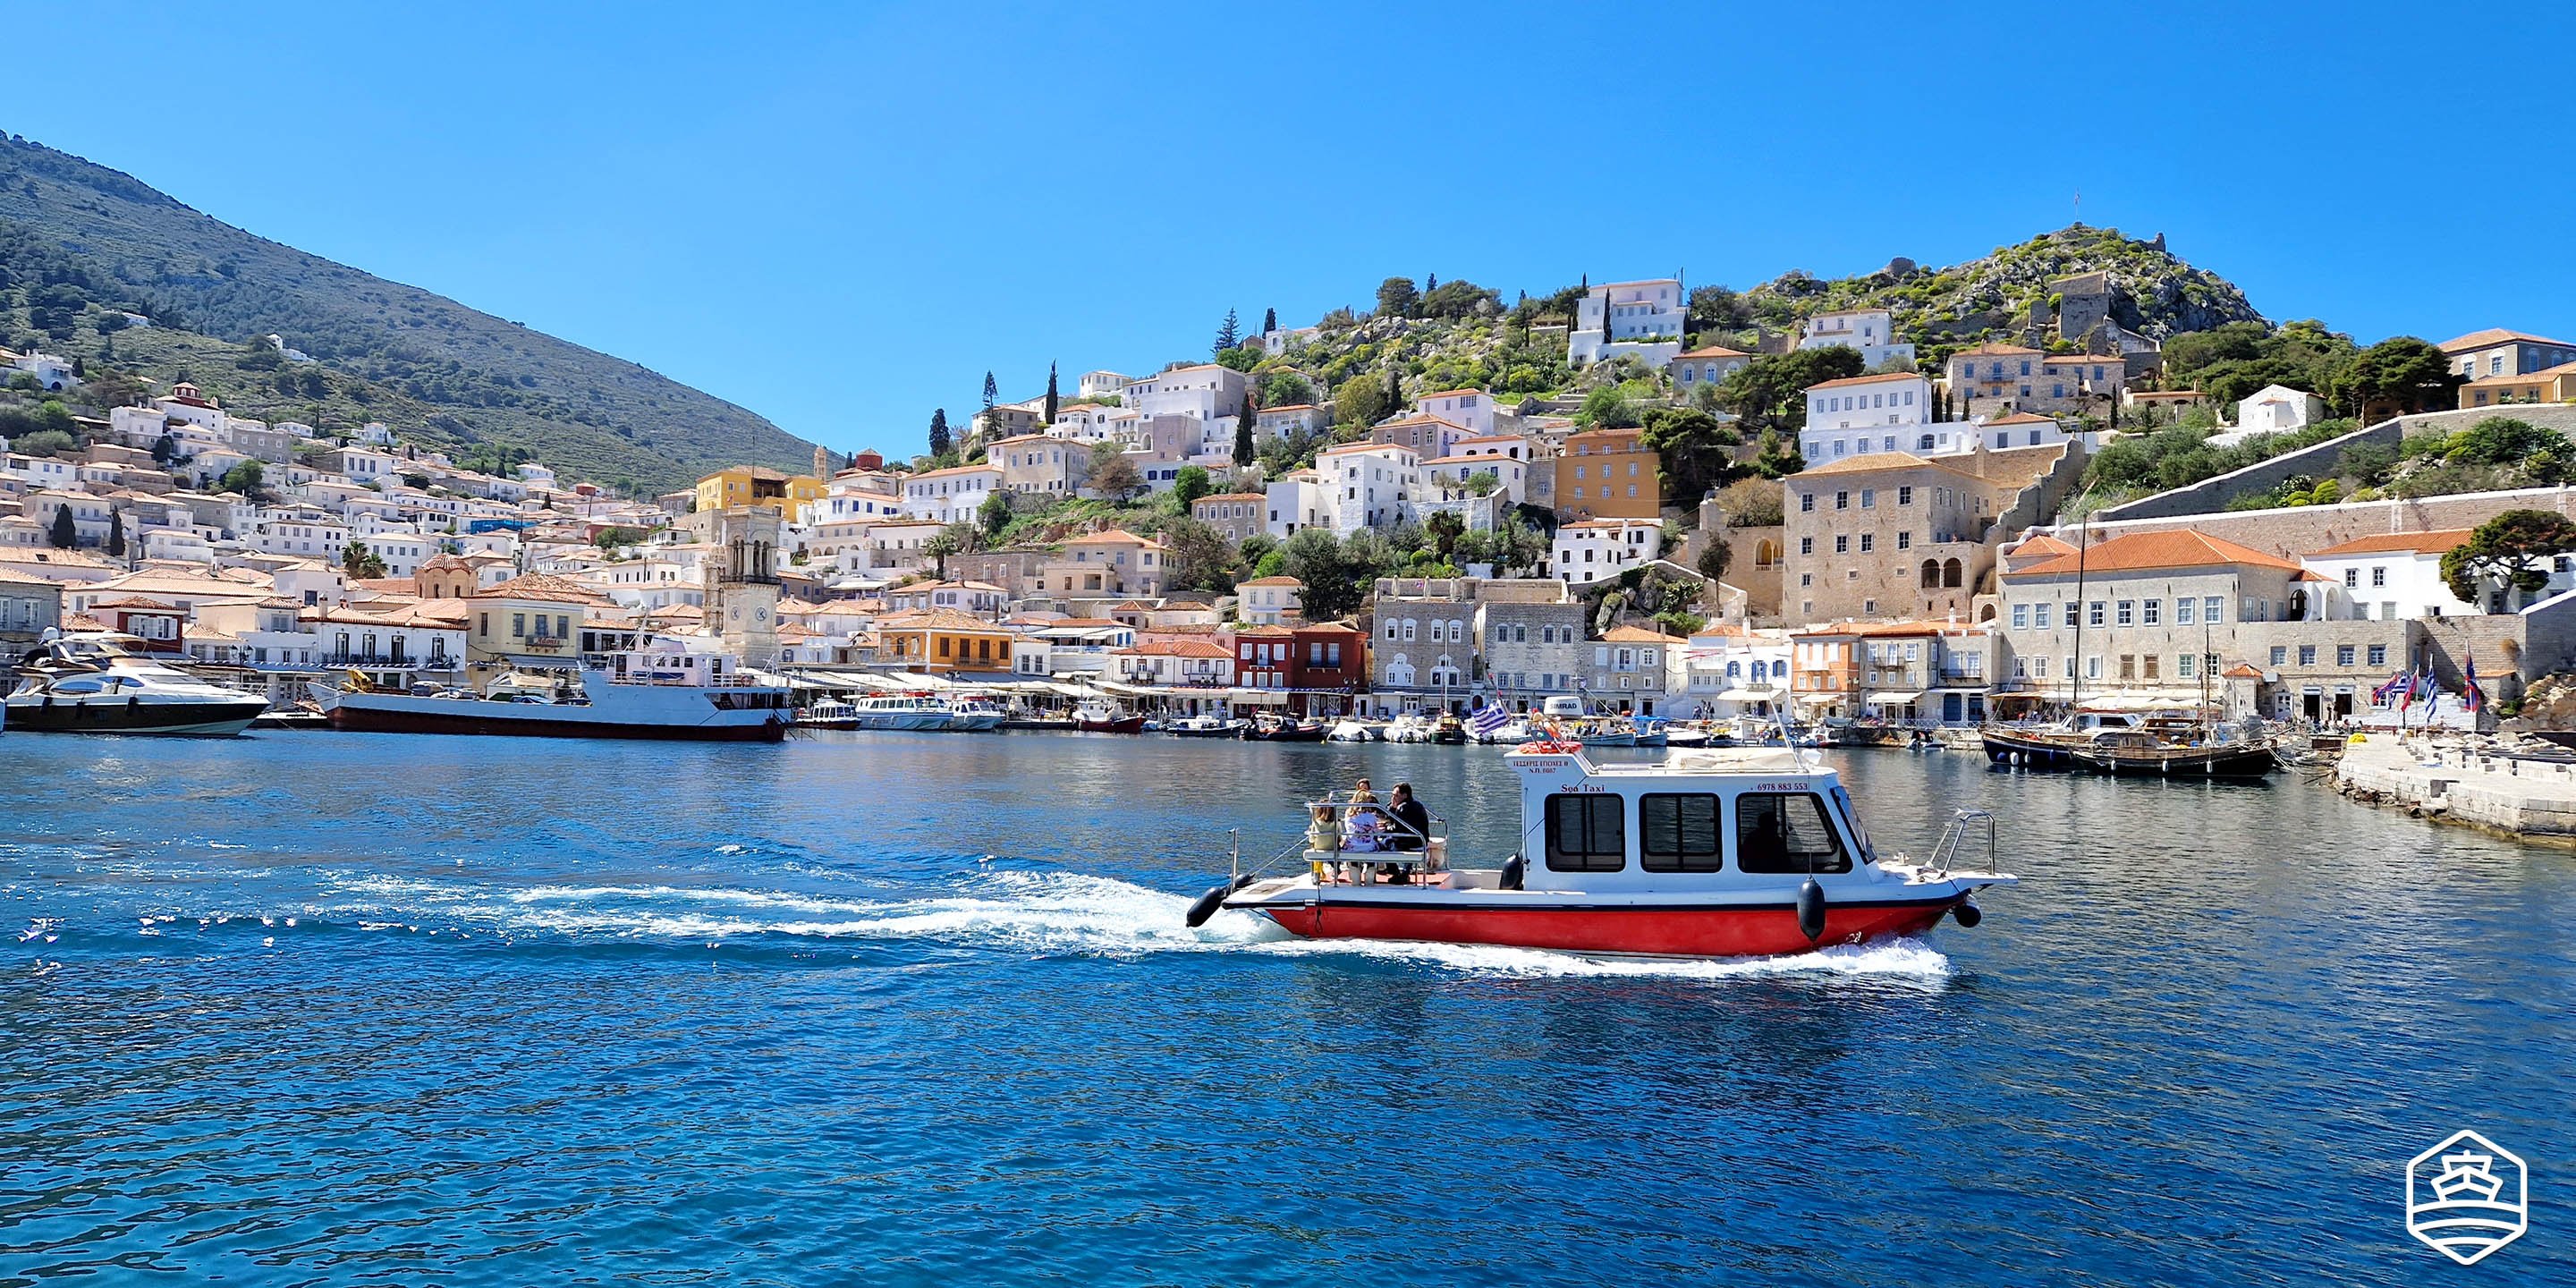 A taxi boat leaving the port of Hydra town